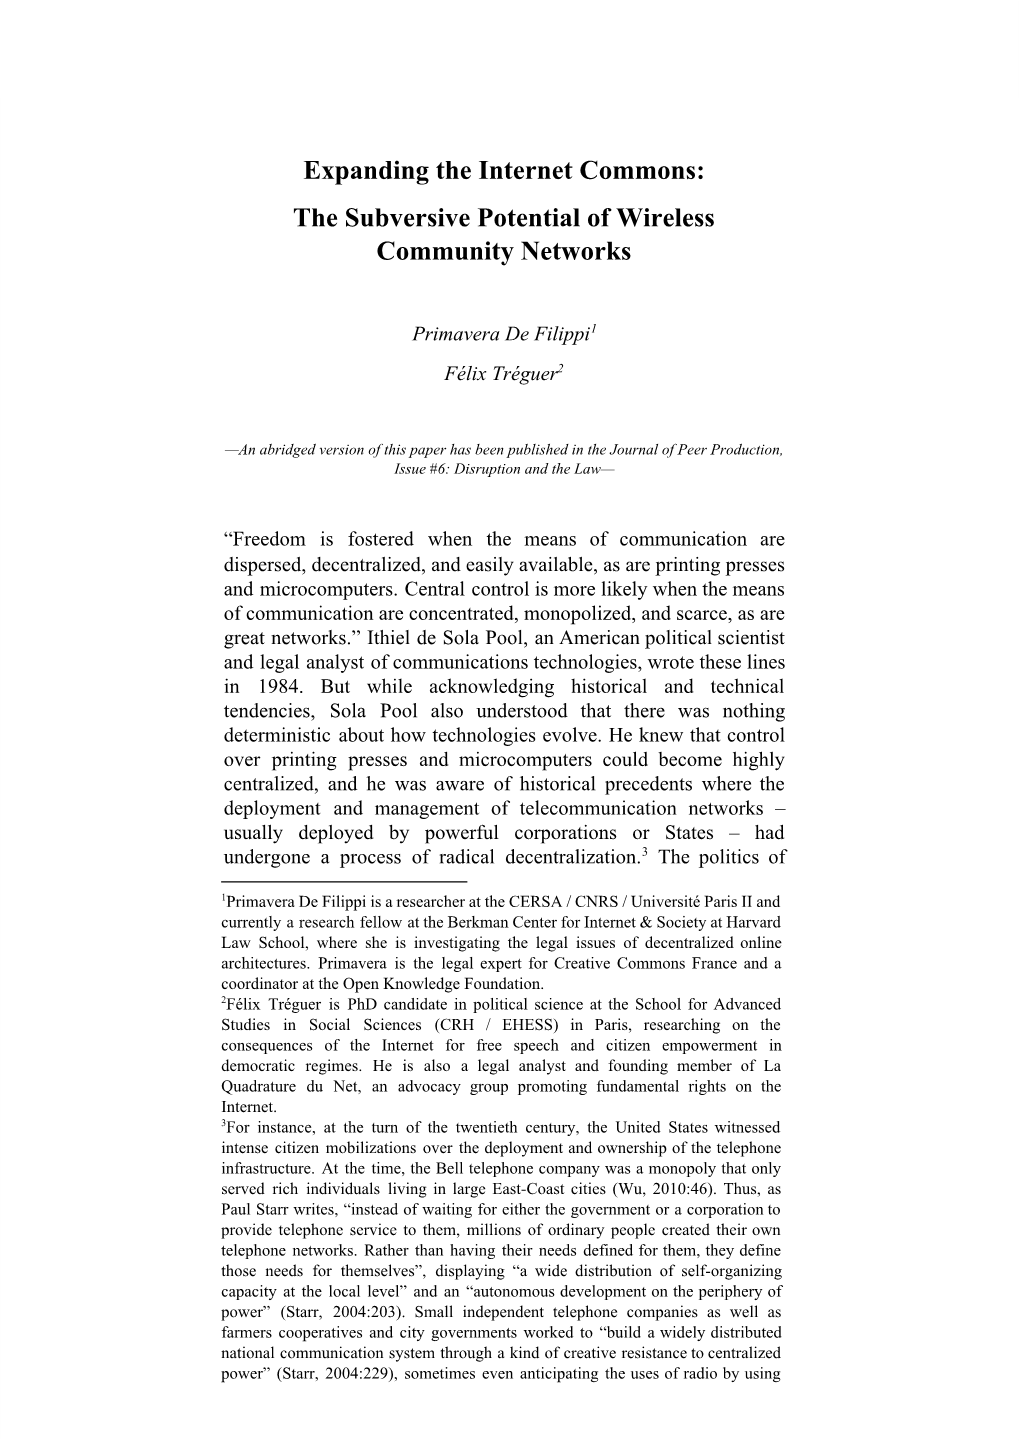 Expanding the Internet Commons: the Subversive Potential of Wireless Community Networks